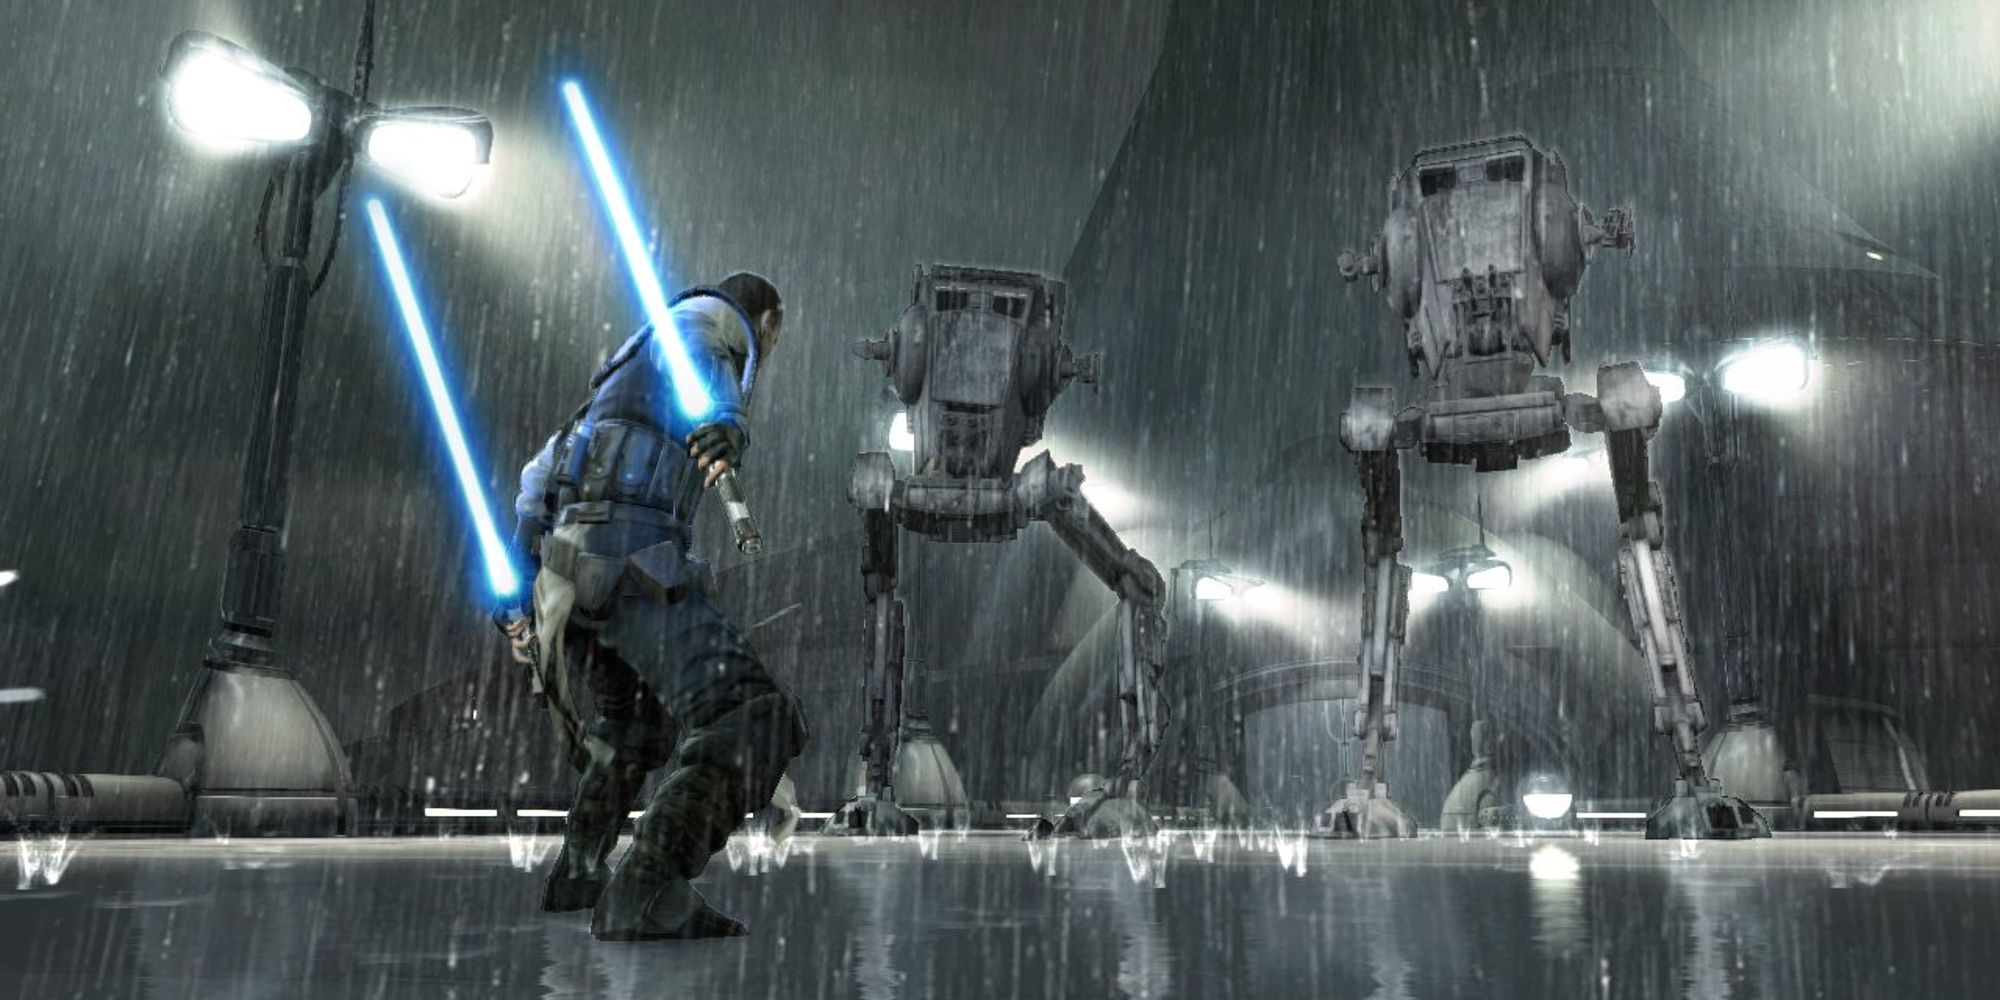 Starkiller confronting two AT-ST walkers in The Force Unleashed II